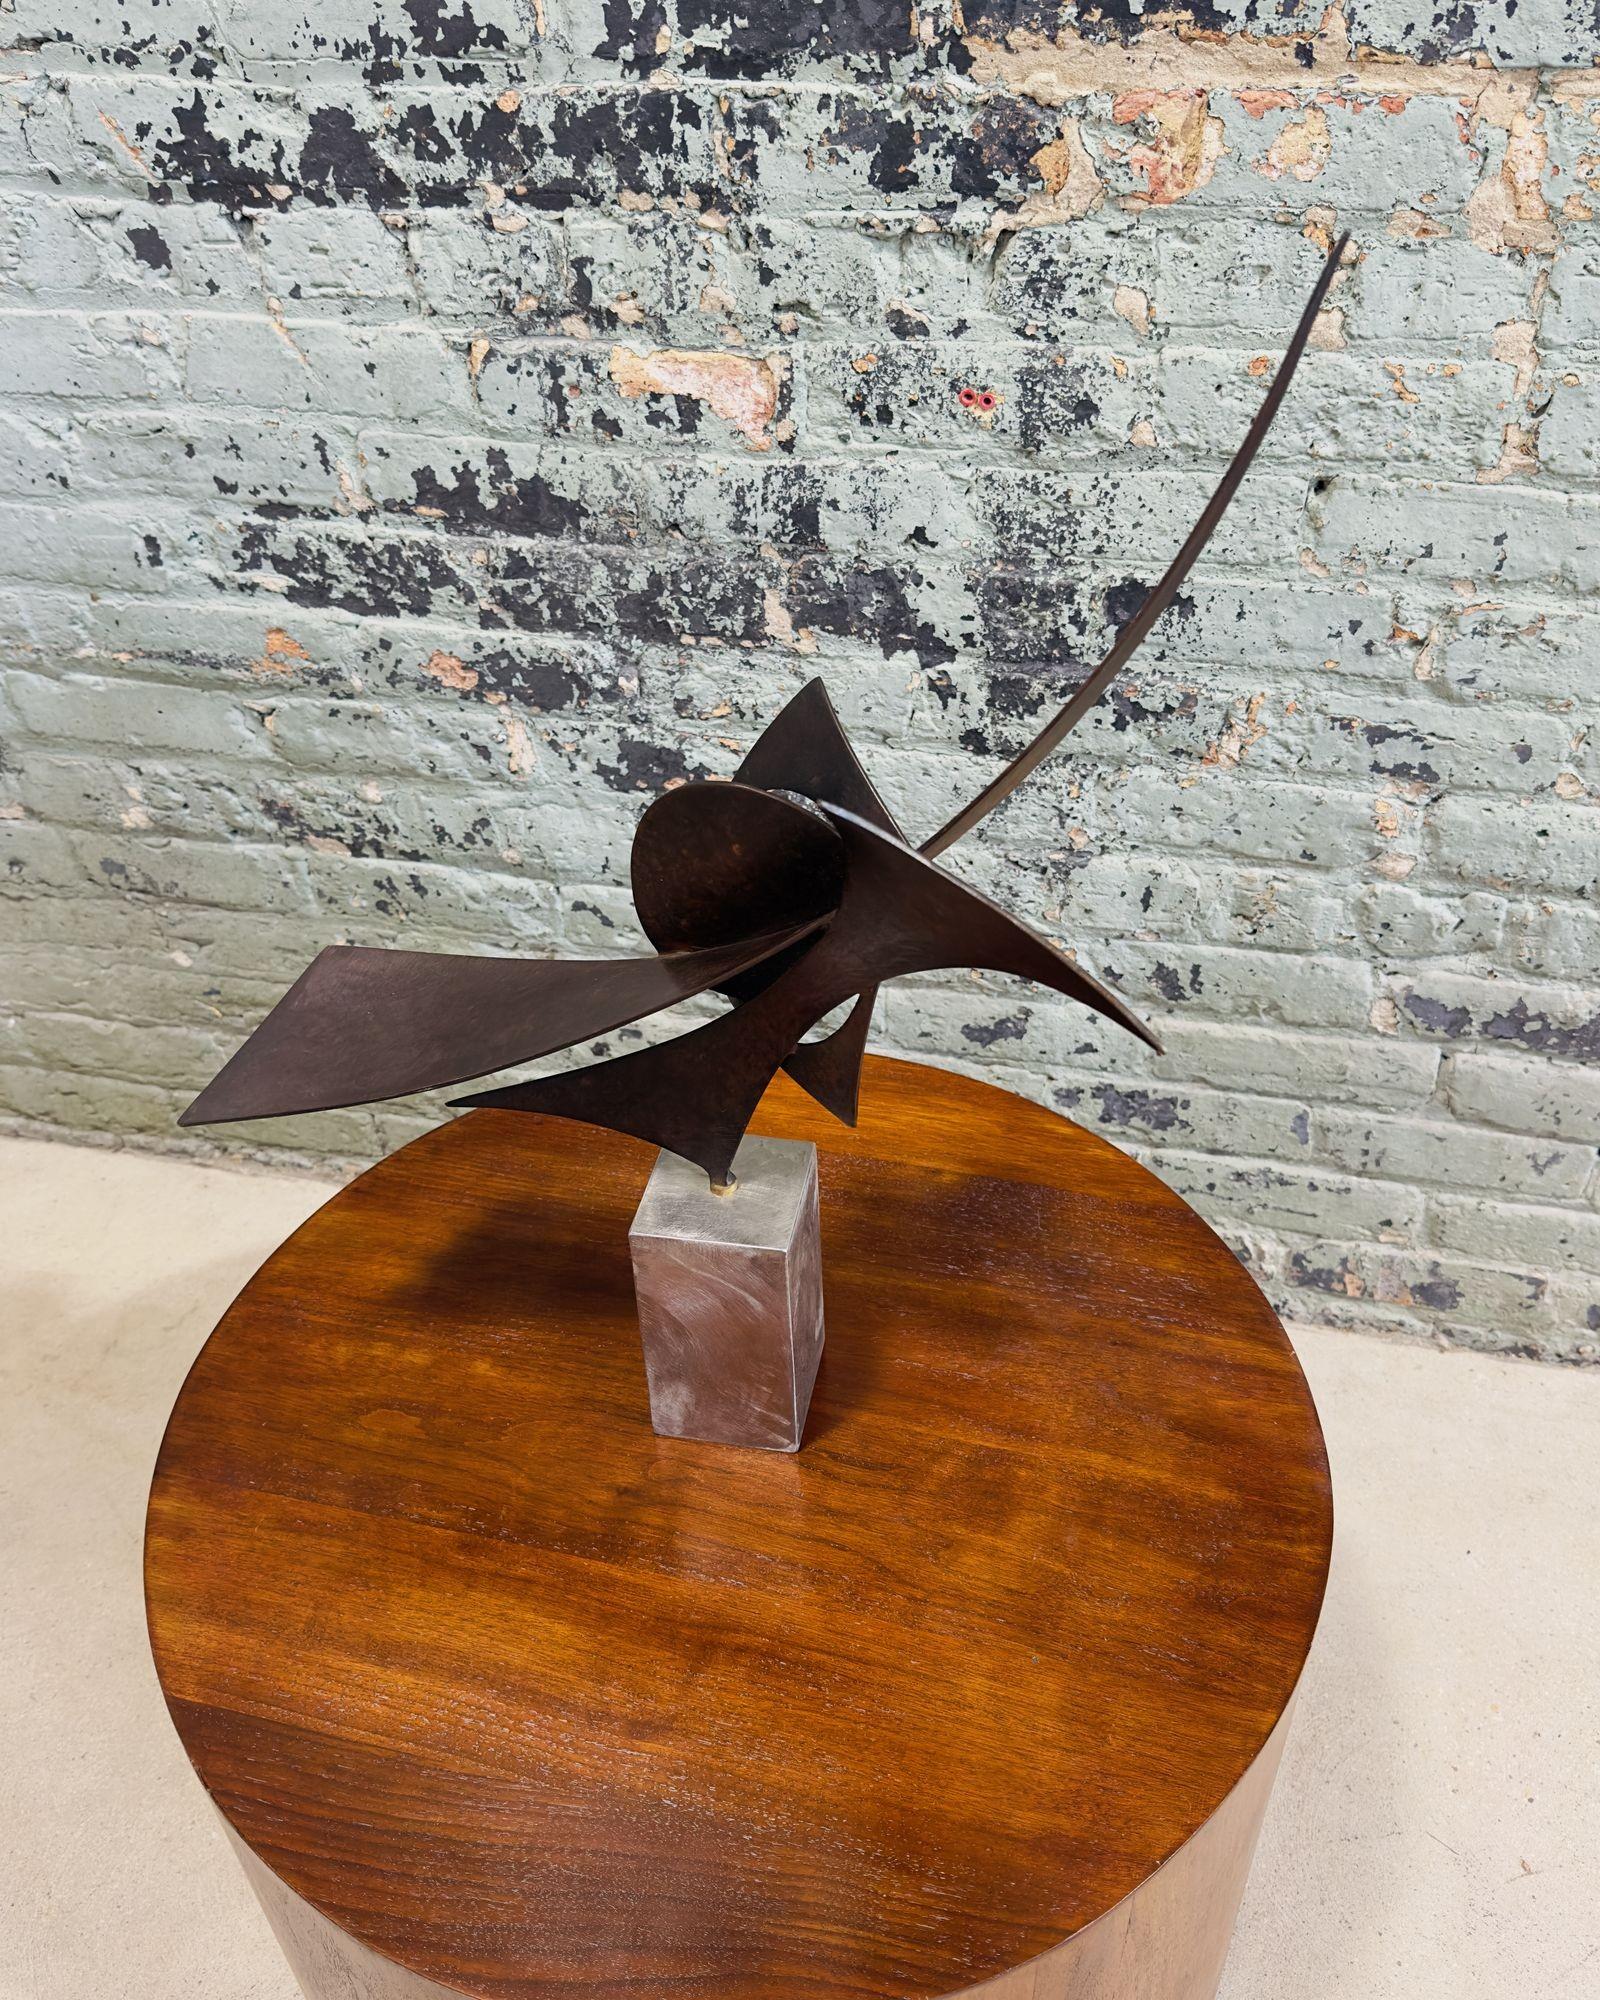 Bruce Niemi Bronze Sculpture Signed, 2003. Base is made out of brushed steel.